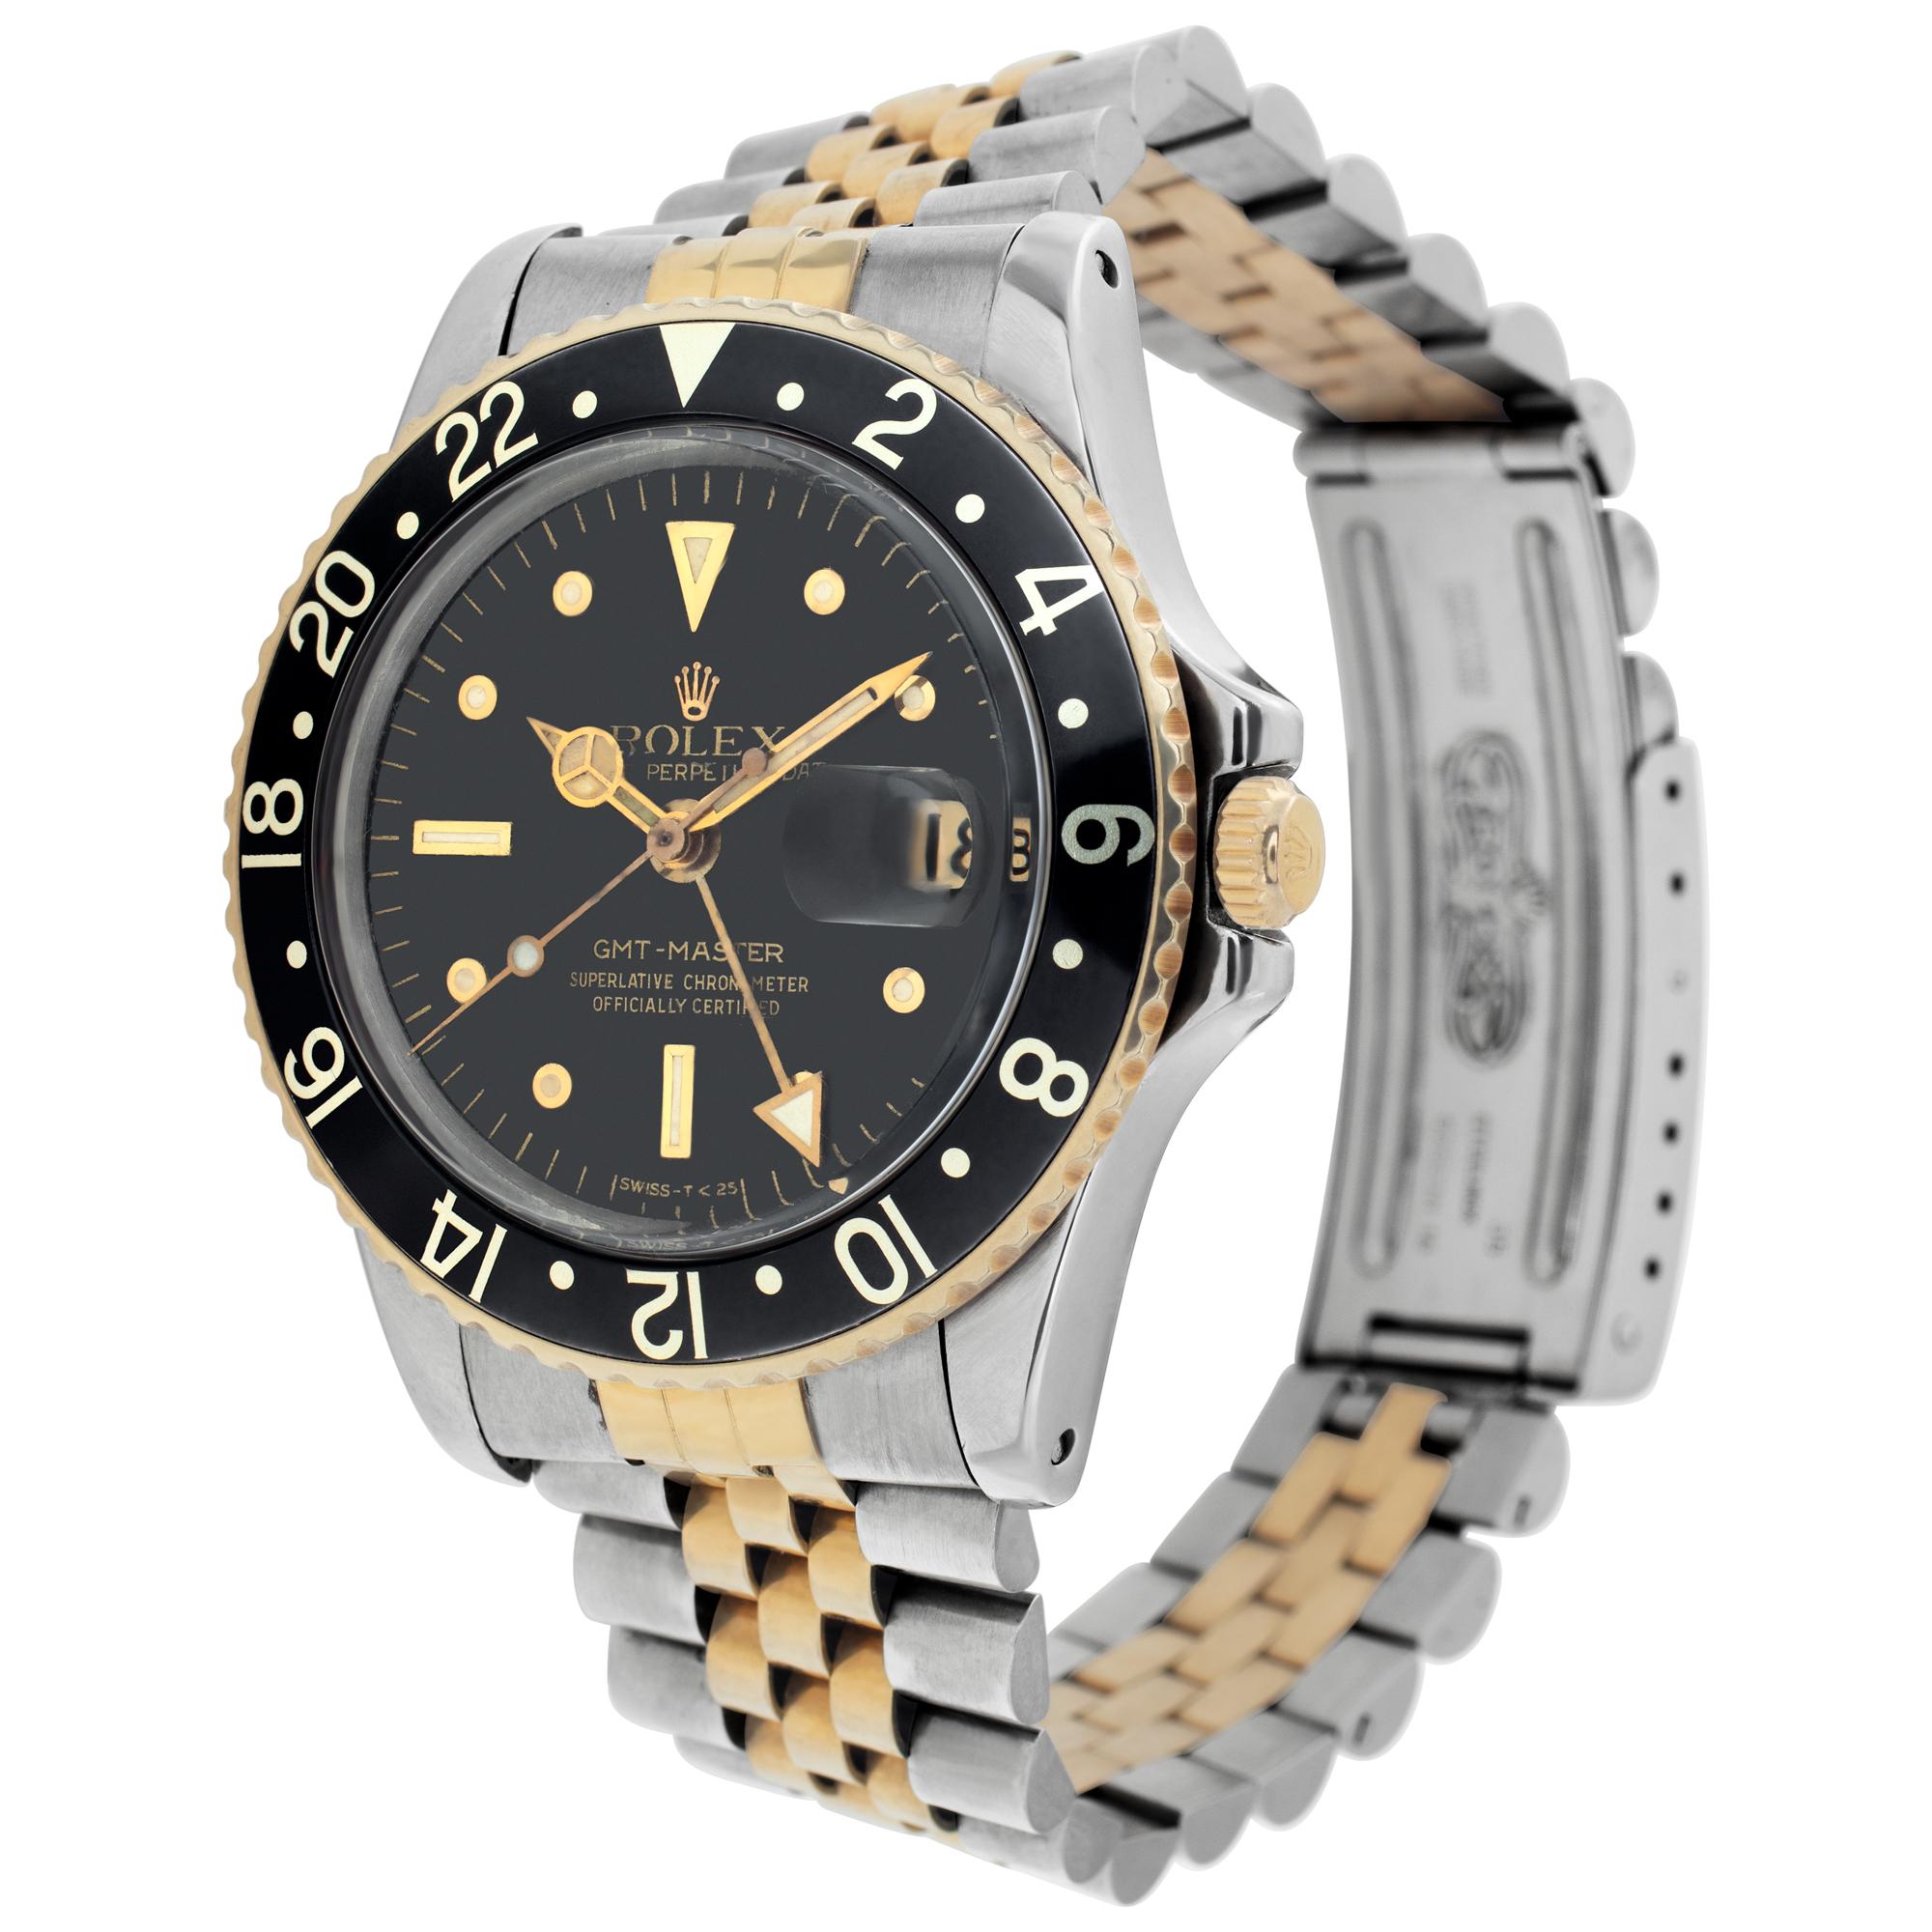 Rolex GMT-Master in 18k & stainless steel with nipple dial. Auto w/ sweep seconds, date and dual time. 40 mm case size. **Bank wire only at this price** Ref 1675. Fine Pre-owned Rolex Watch. Certified preowned Sport Rolex GMT-Master 1675 watch is